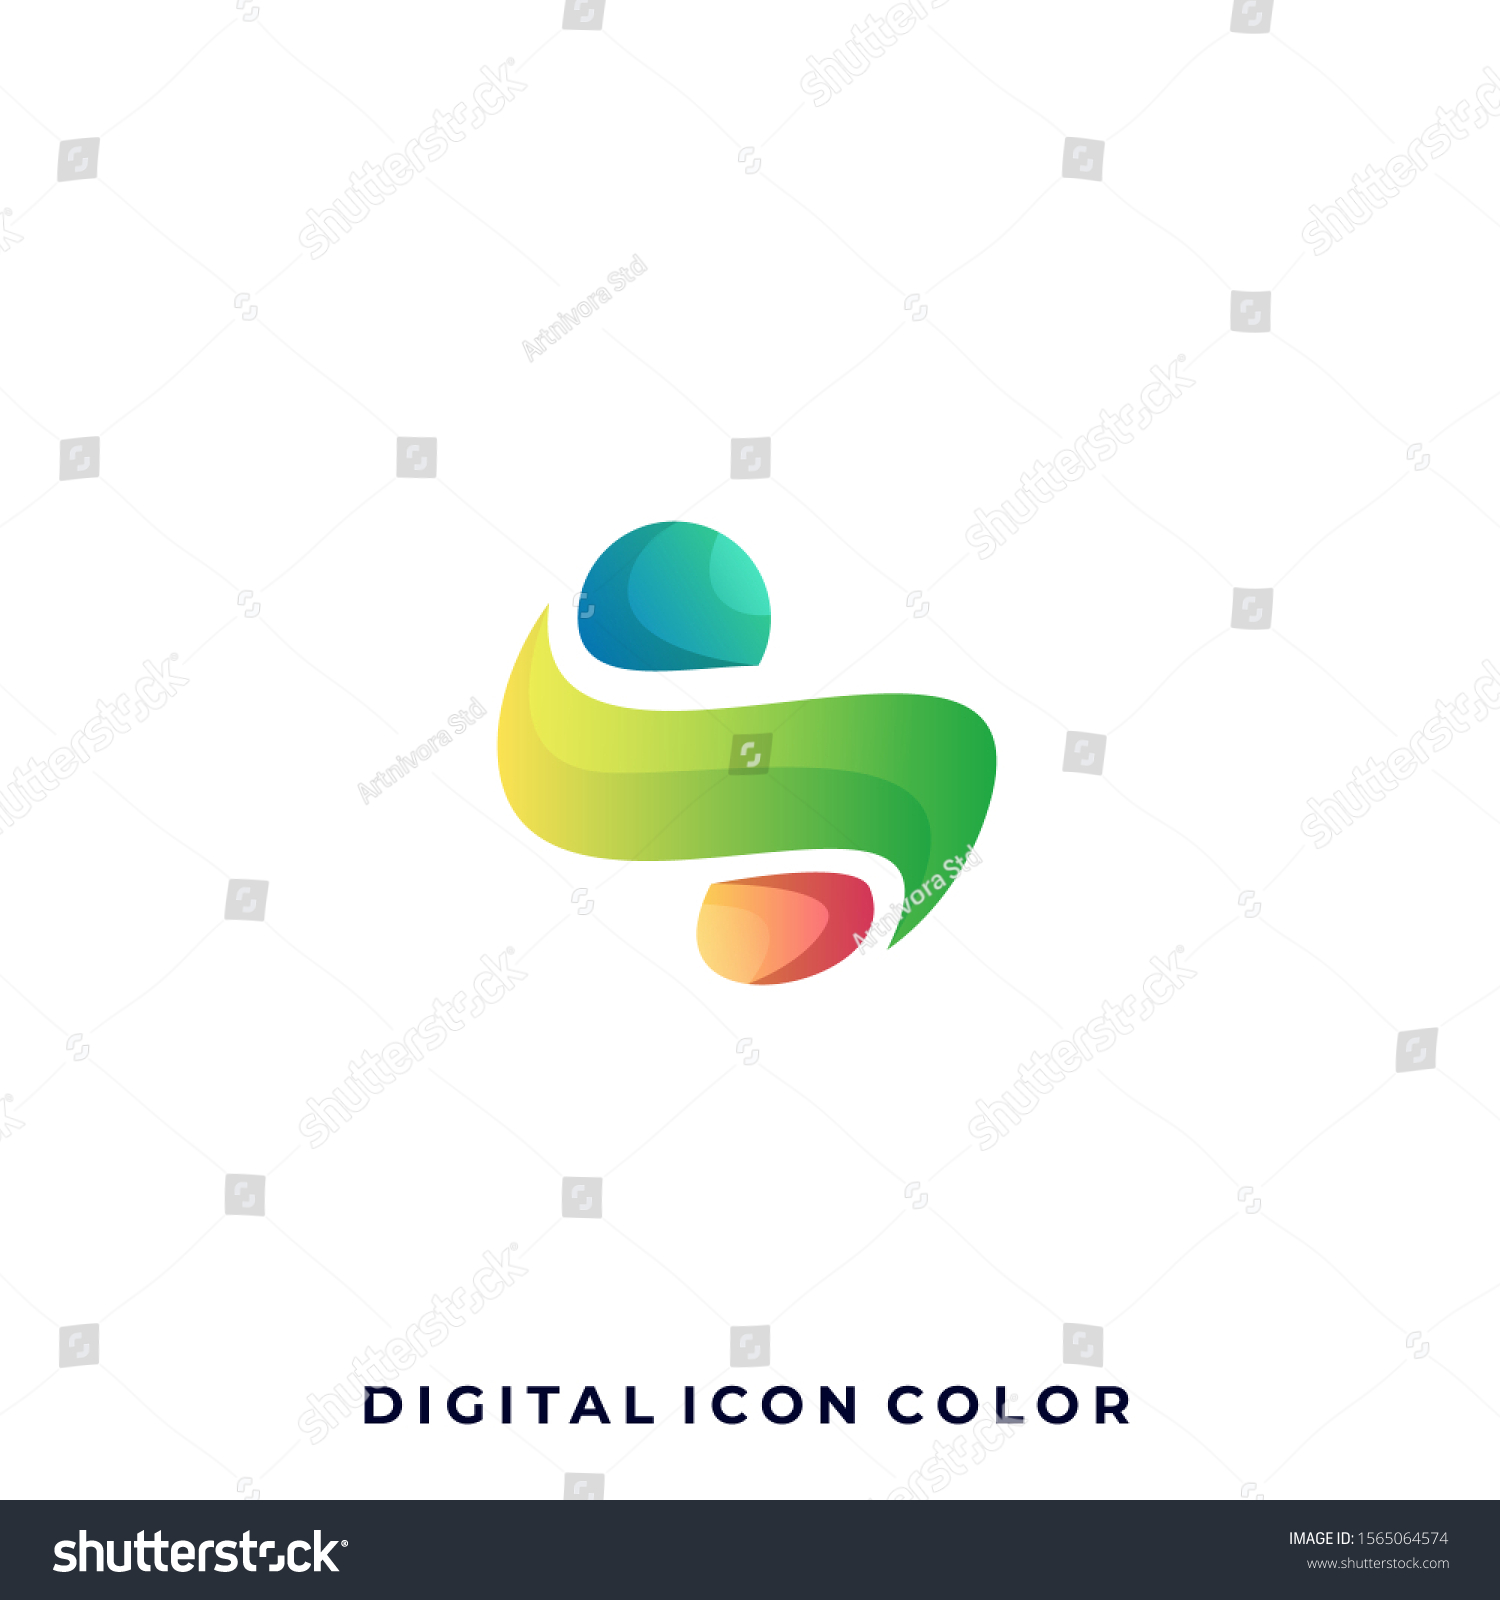 Letter N Colorful Illustration Vector Design Stock Vector (Royalty Free ...